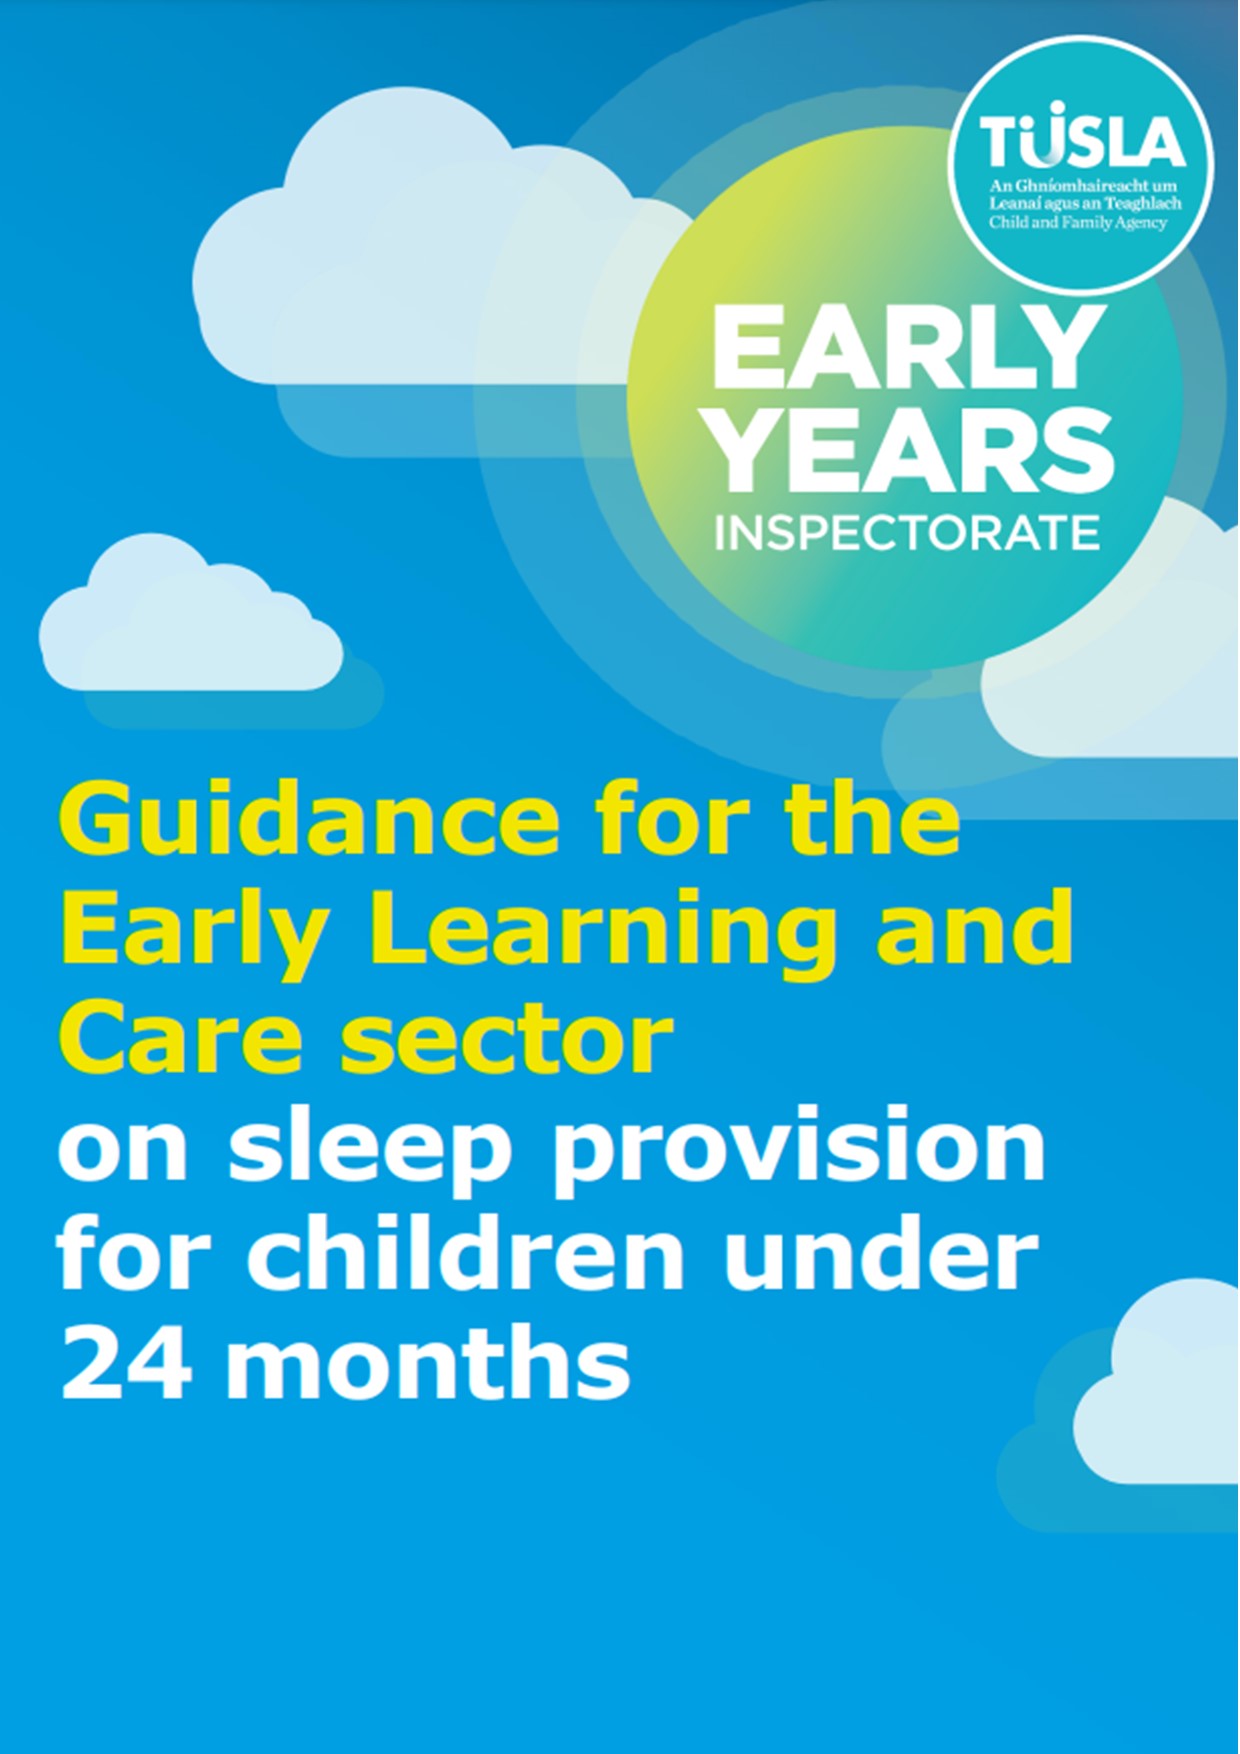 Guidance for the Early Learning and Care sector on sleep provision for children under 24 months